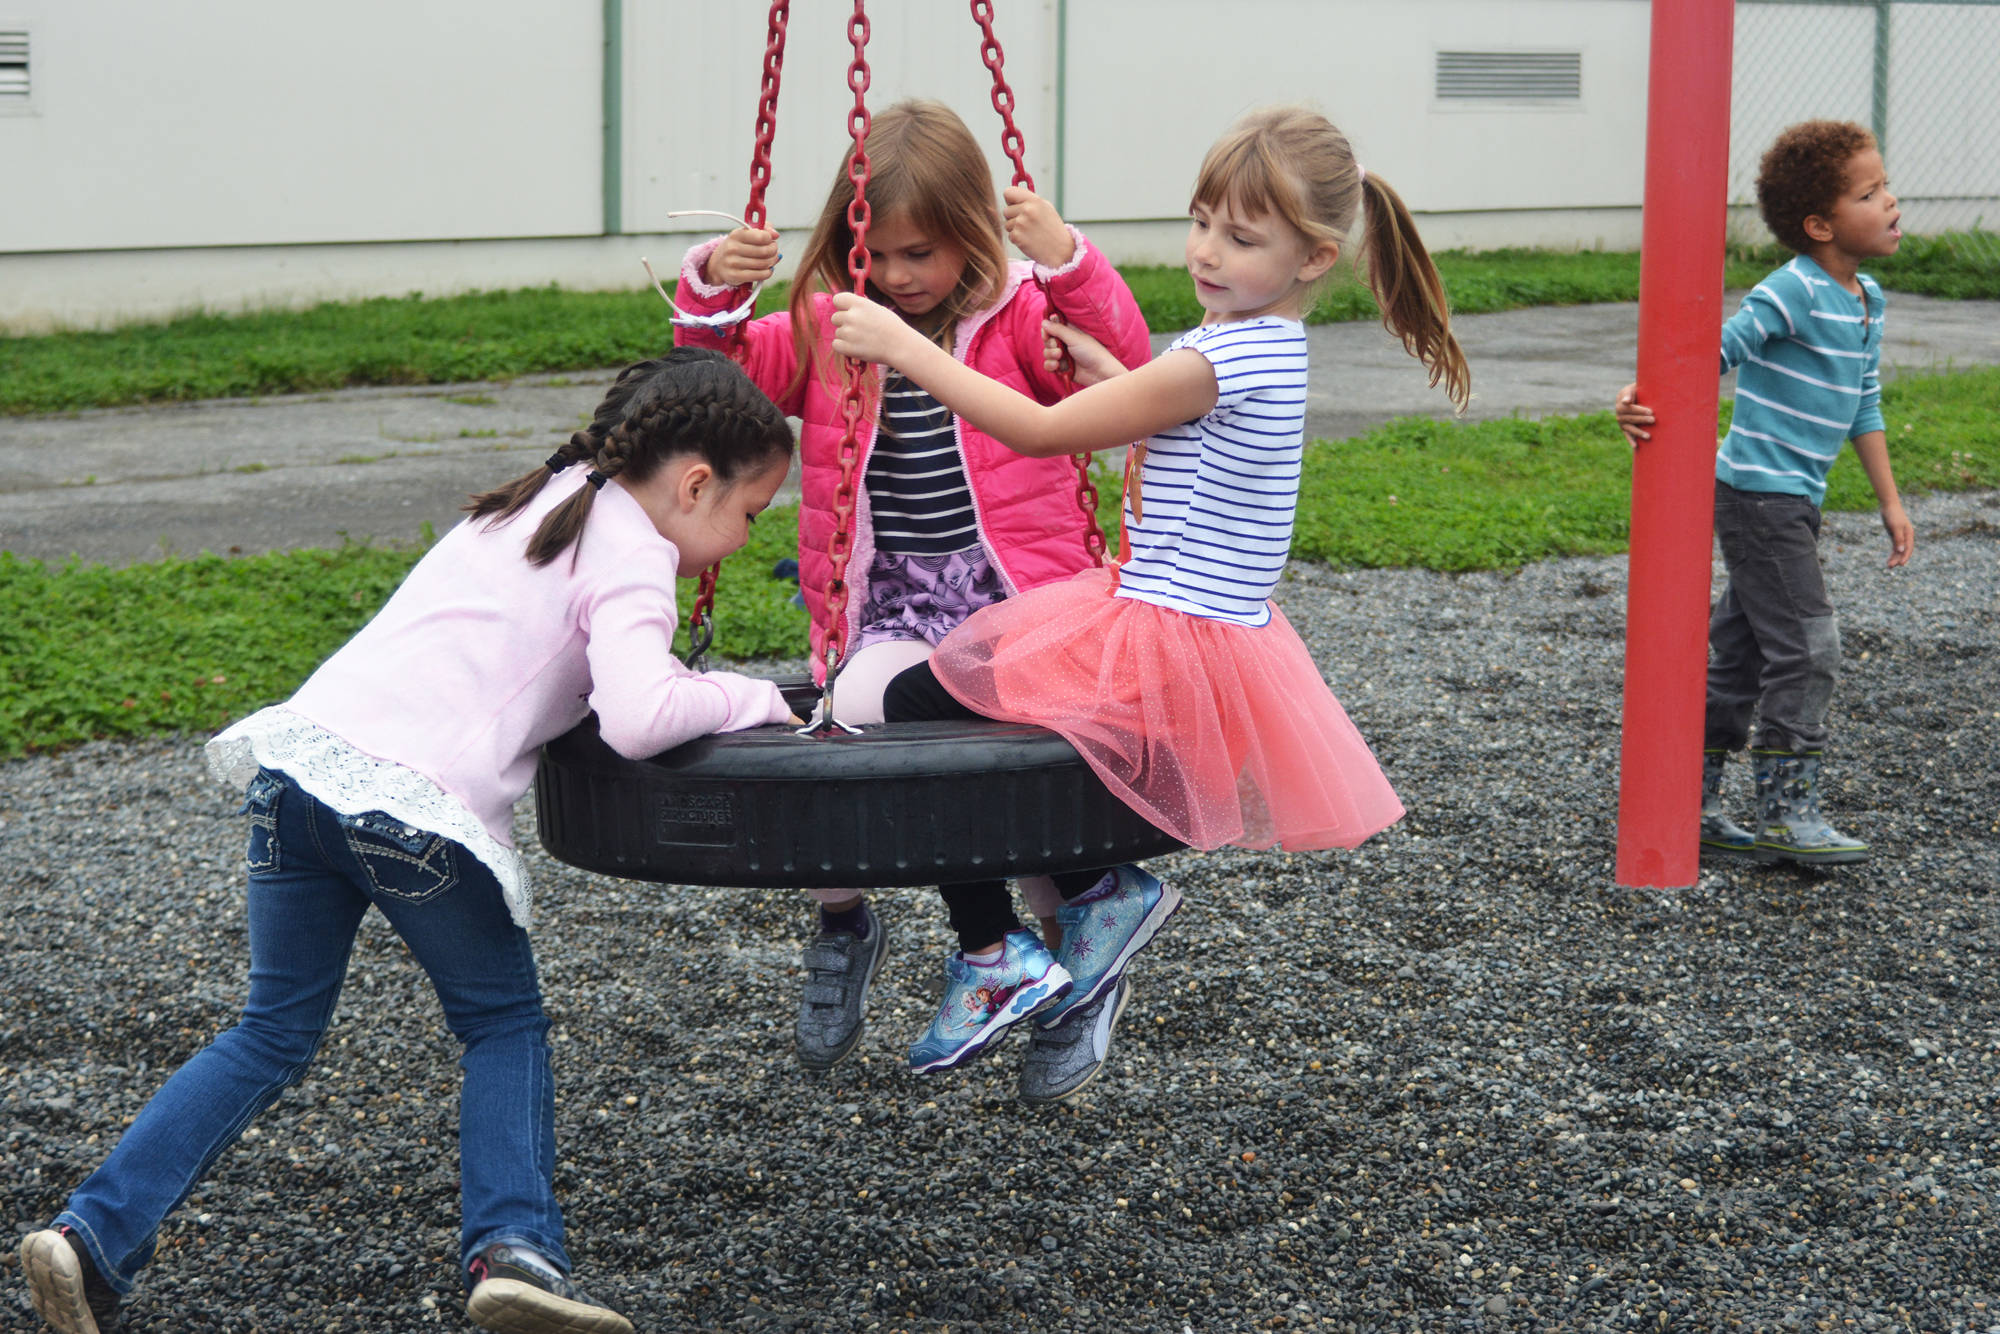 Sydney Abell pushes Jillian Koran (center) and Grace Shover (right) on a swing during recess on the first day of the school year Tuesday, Aug. 22, 2017 at Paul Banks Elementary in Homer, Alaska. (Photo by Megan Pacer/Homer News)